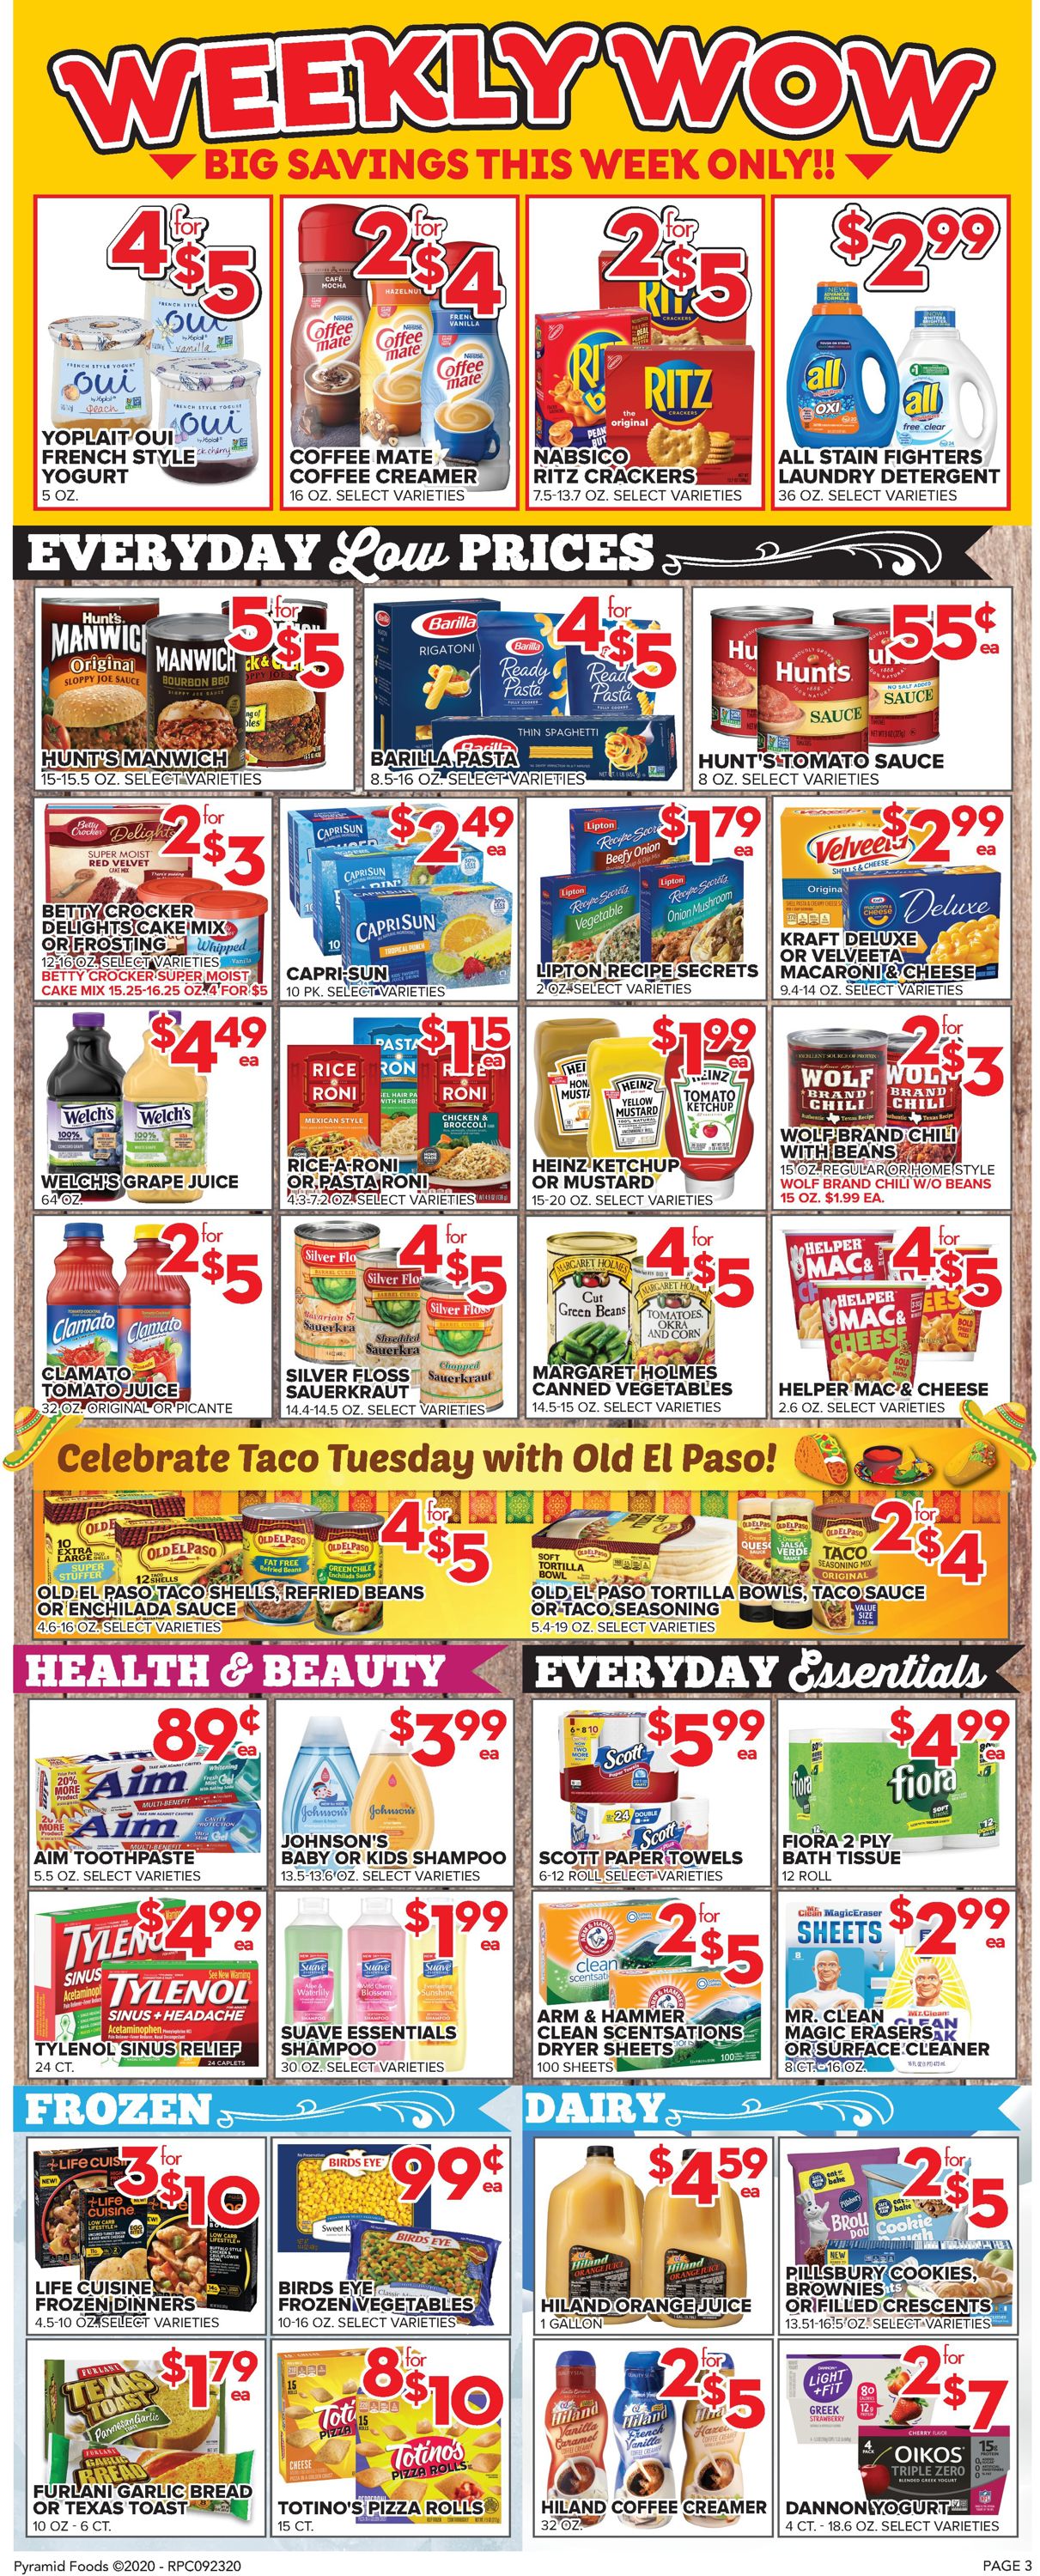 Price Cutter Weekly Ad Circular - valid 09/23-09/29/2020 (Page 3)